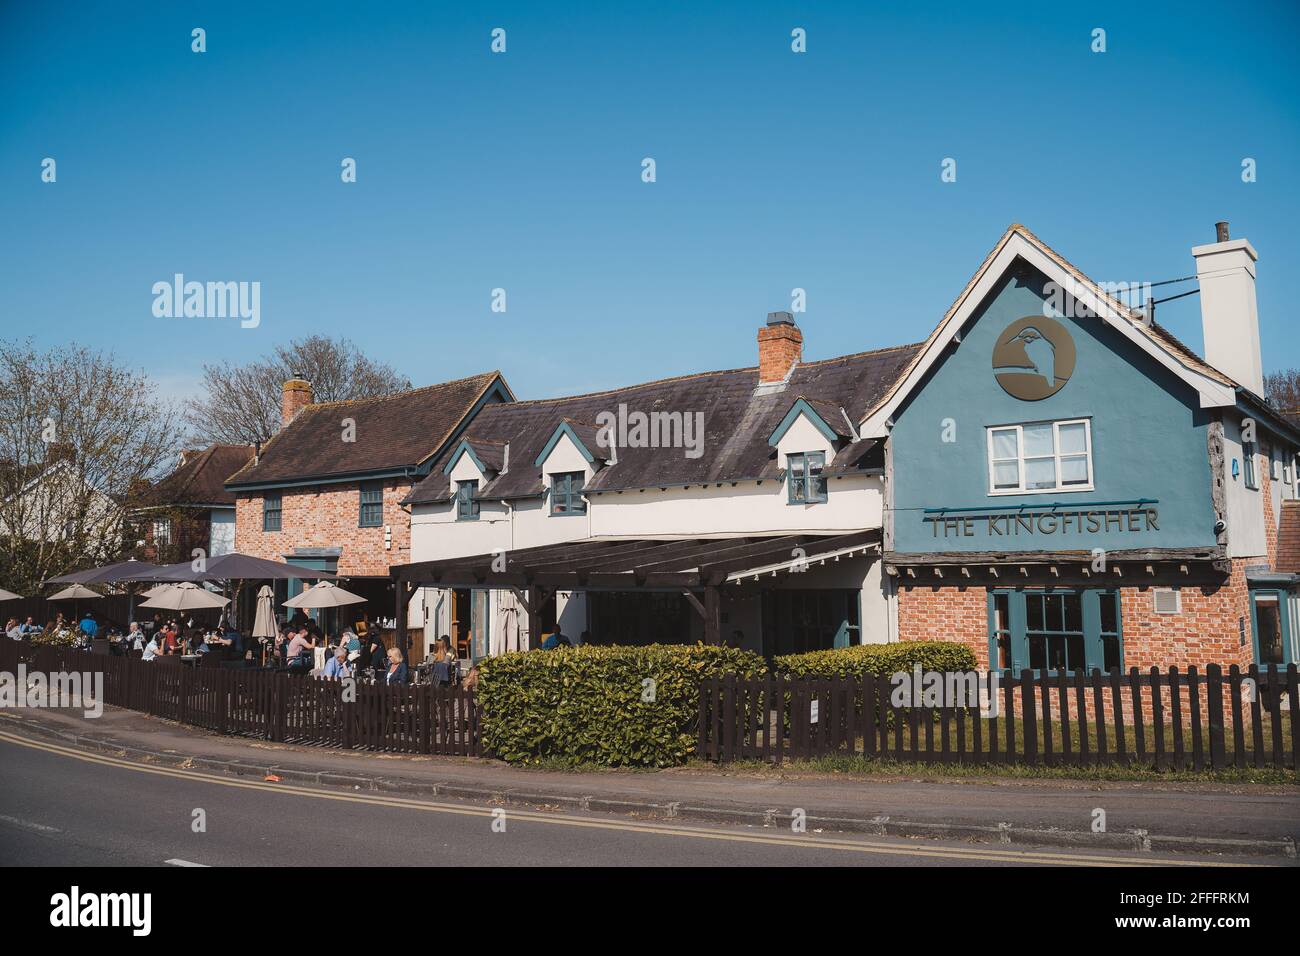 Staines-upon-Thames, Spelthorne  | UK -  2021.04.24: The Kingfisher pub restaurant open on warm Spring day in Chertsey Stock Photo